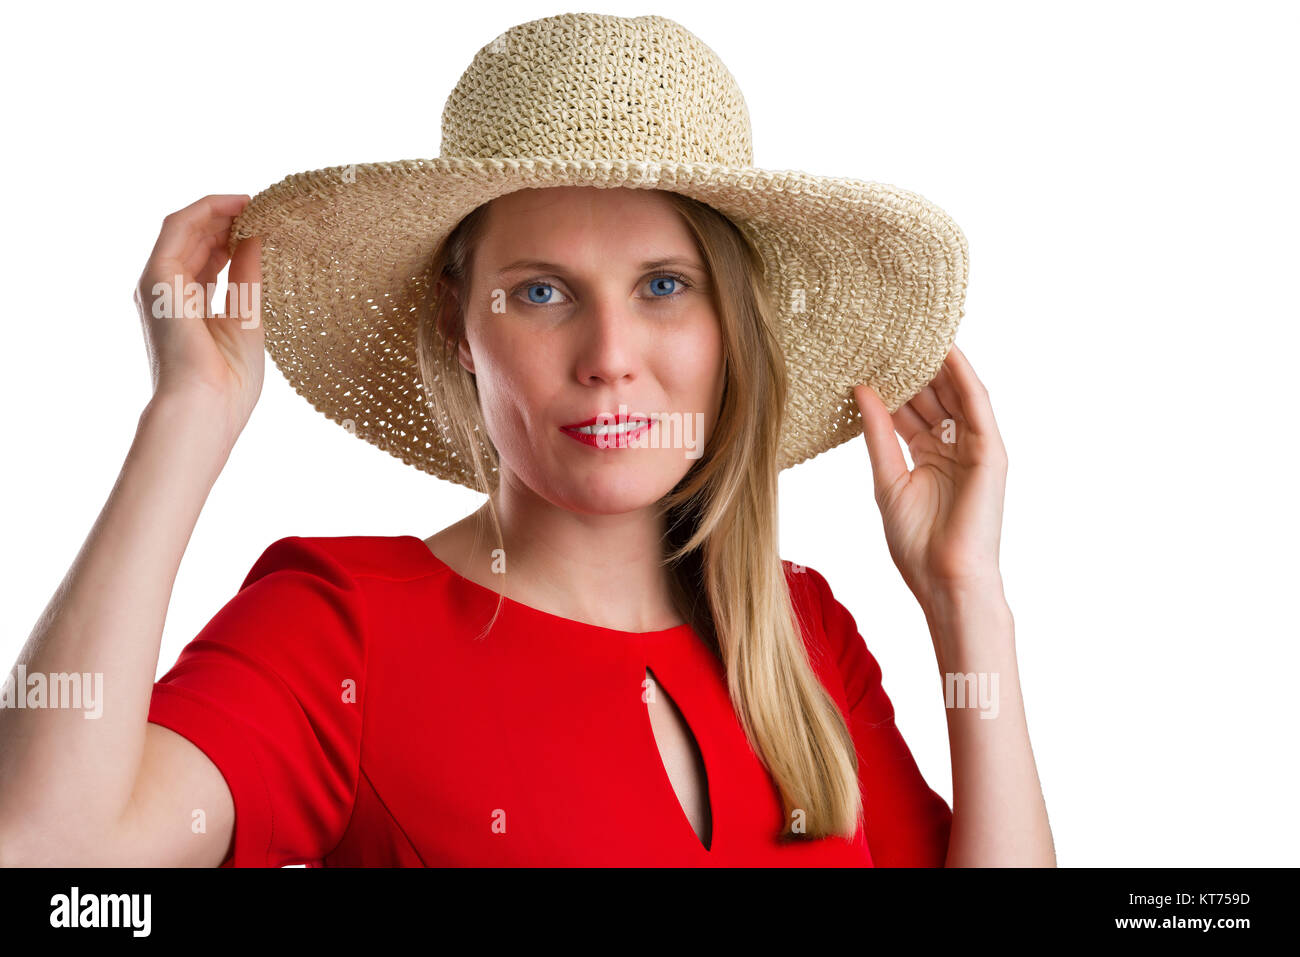 blonde woman in red dress with straw hat,isolated on white Stock Photo